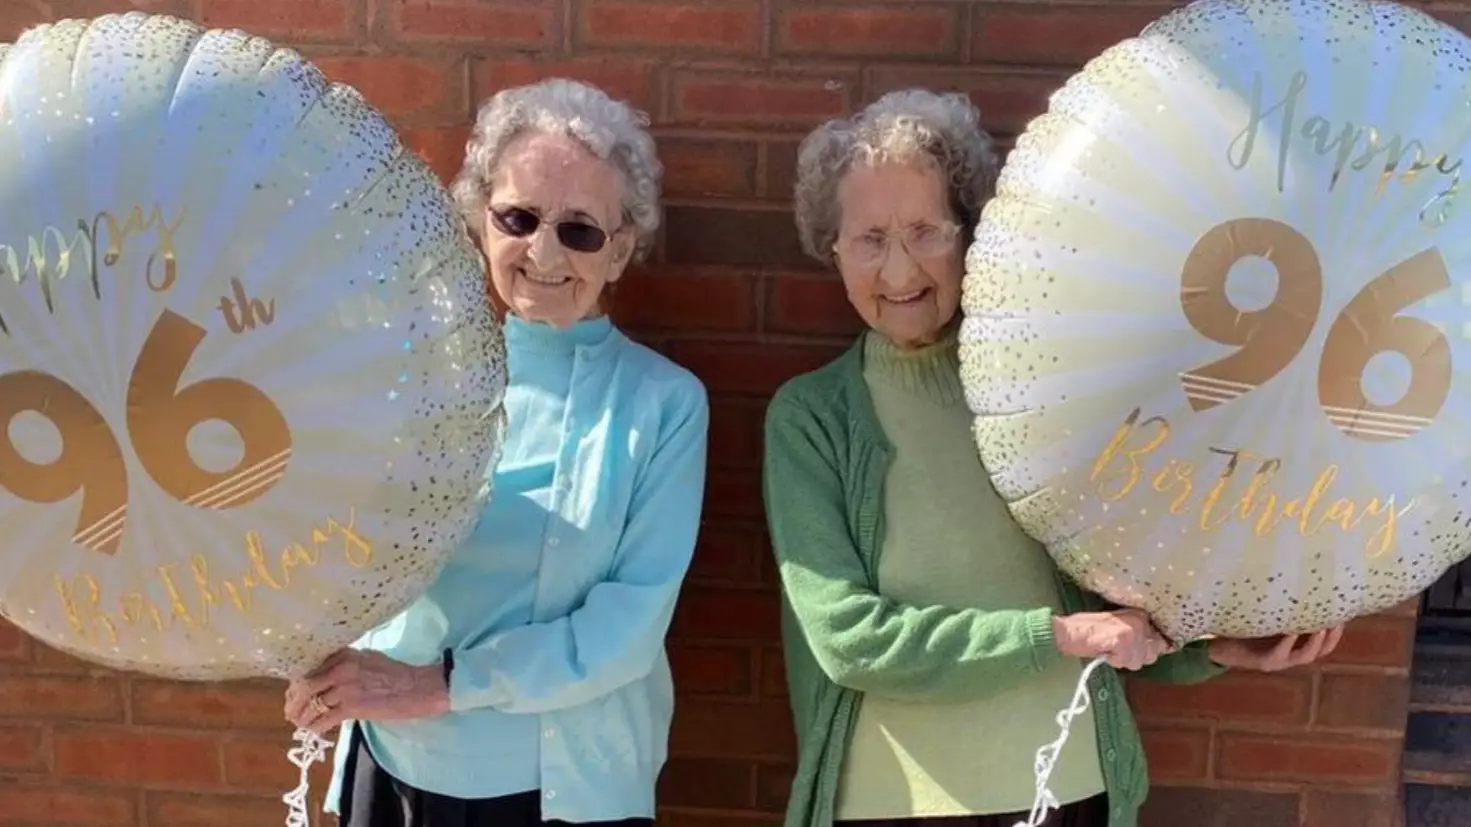 One Of UK's Oldest Identical Twins Dies With Covid